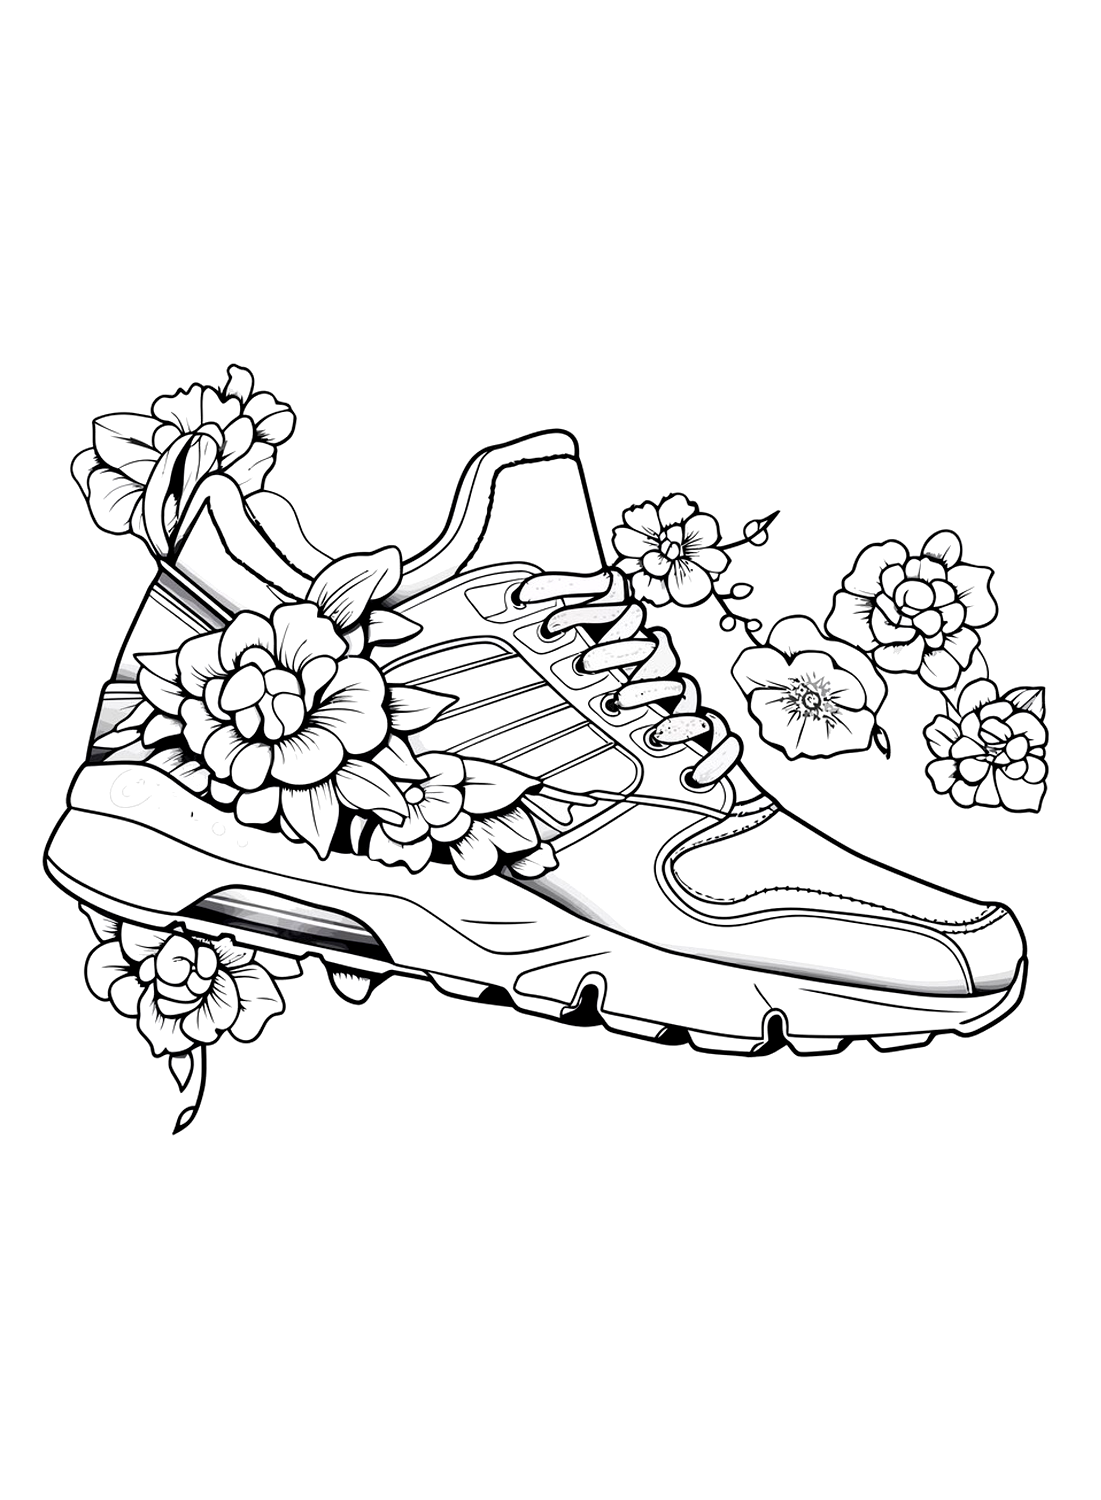 Flowers and shoes coloring sheet